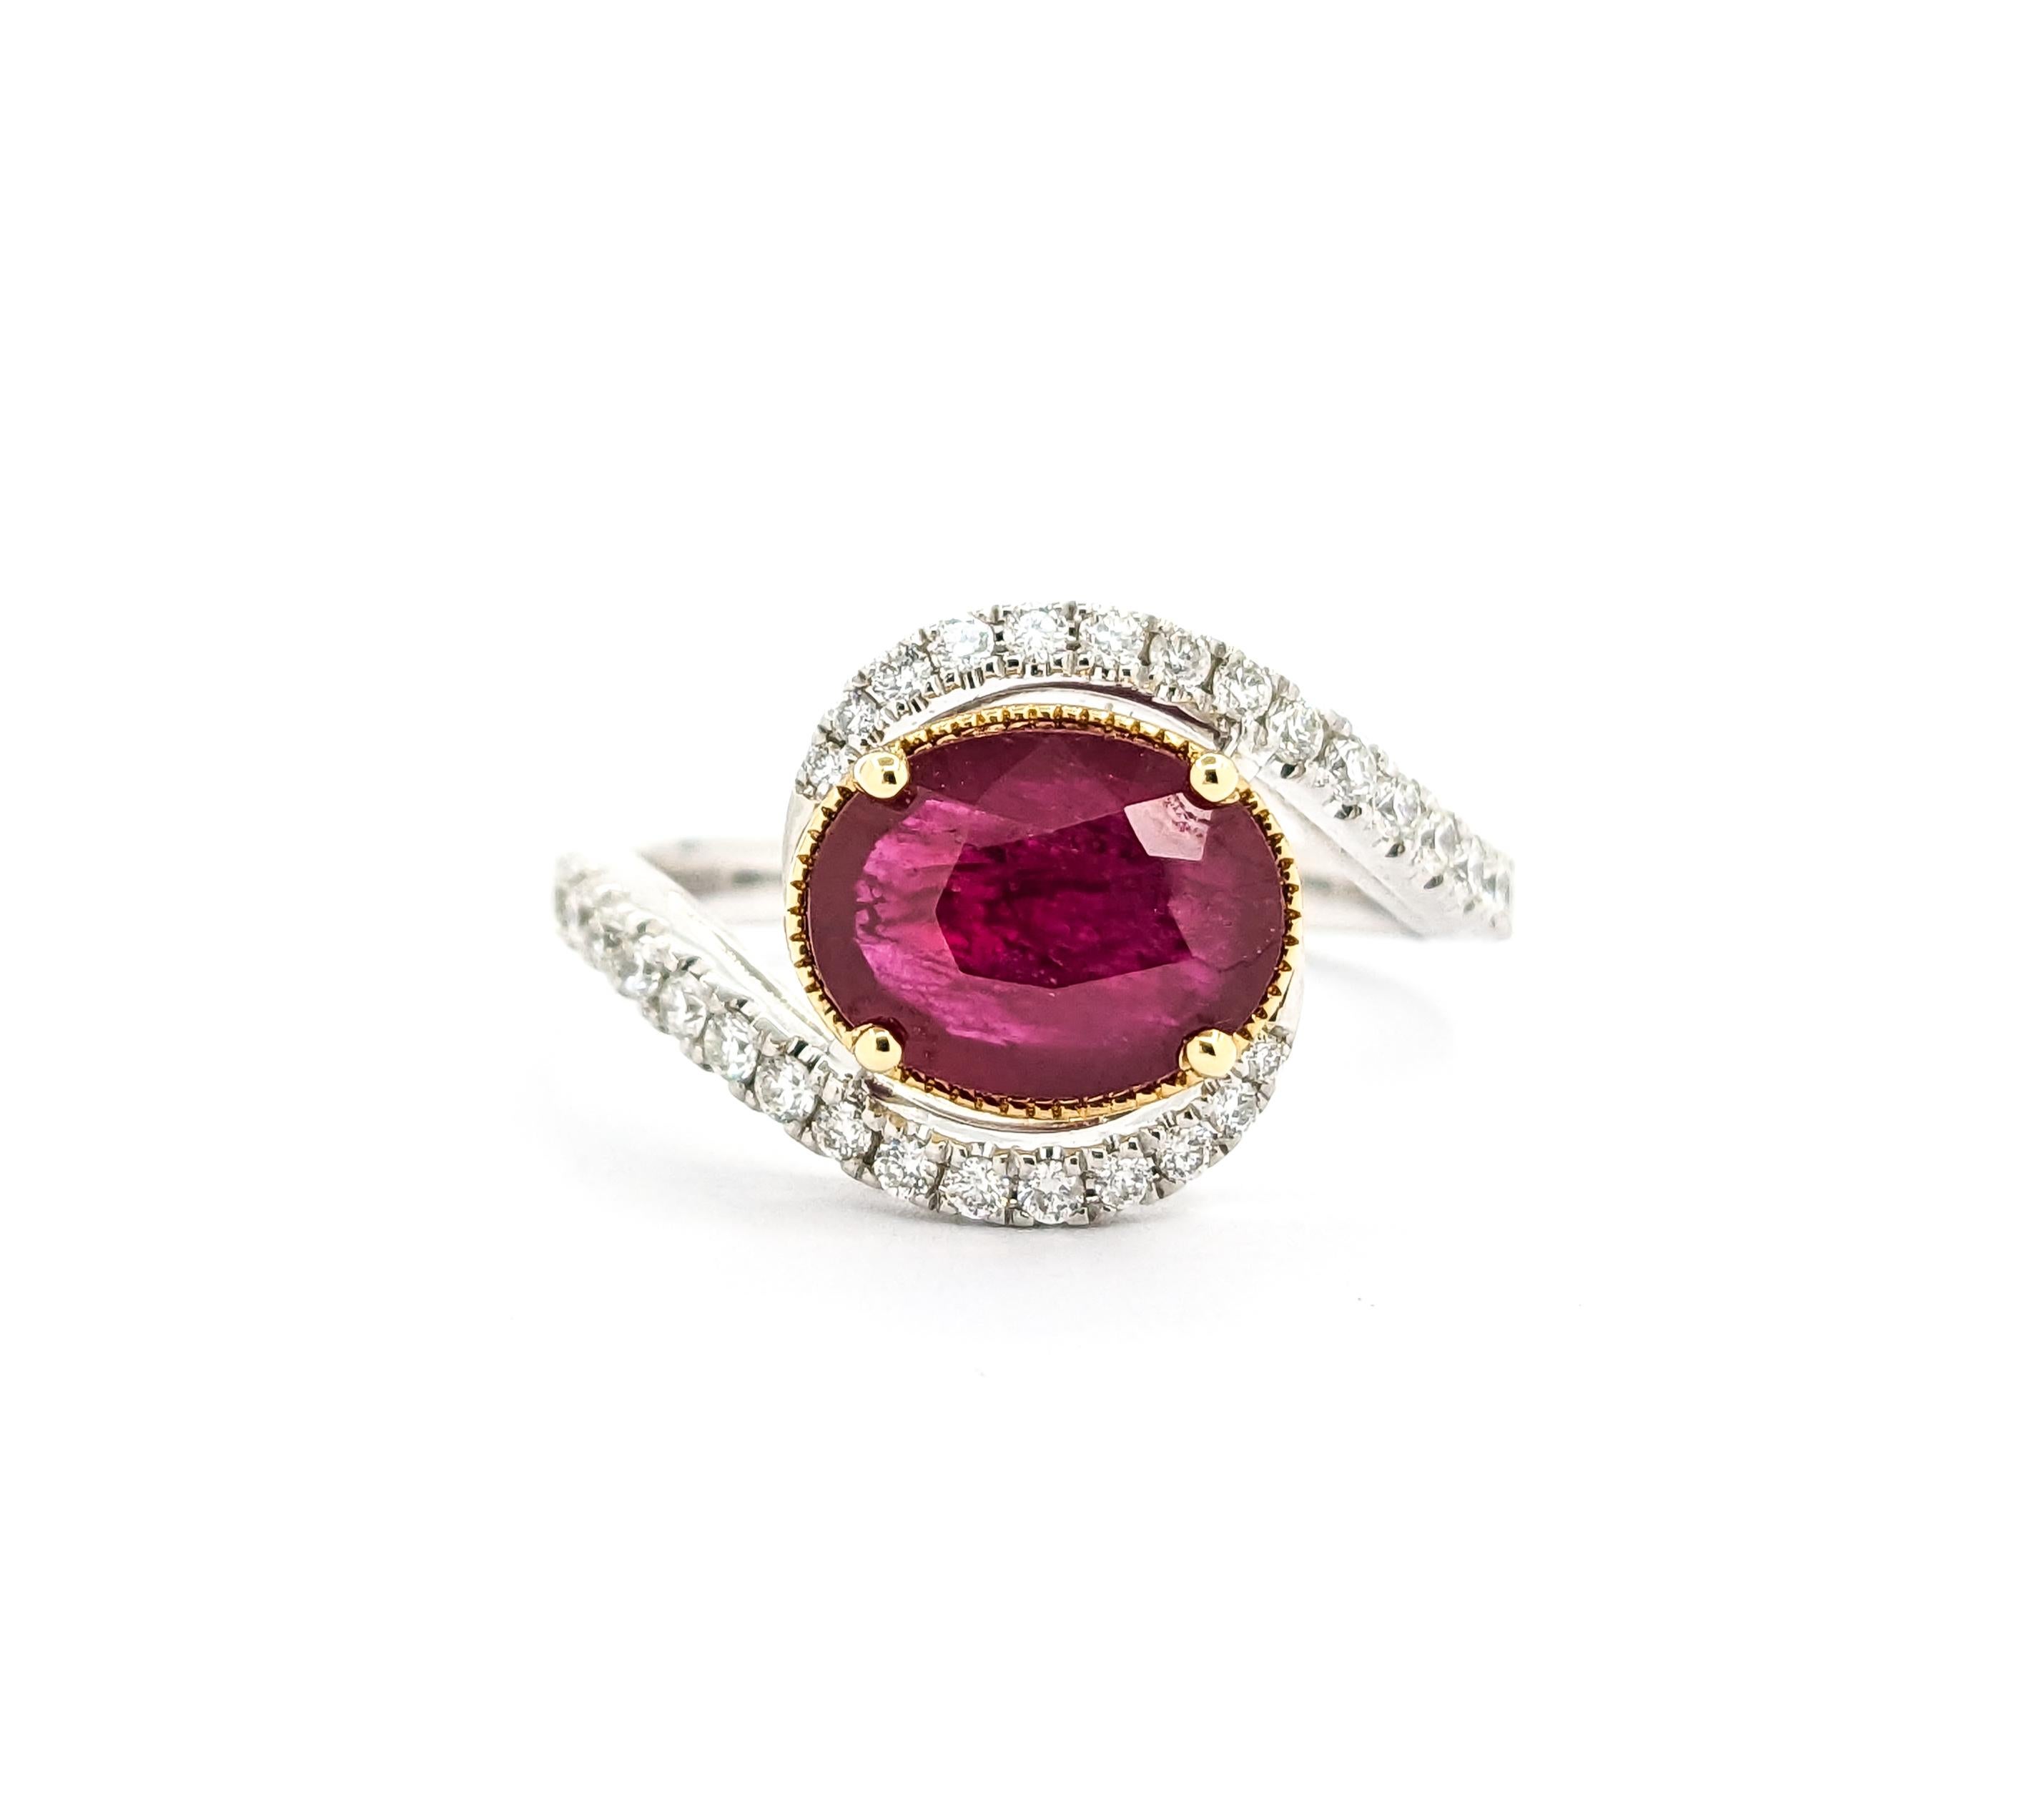 1.8ct Ruby & .34ctw Diamond Ring In Platinum

This exquisite ring is finely crafted in 950pt platinum, showcasing a stunning .34ctw of diamonds paired with a mesmerizing 1.8ctw oval ruby. The diamonds glitter with an SI2-I1 clarity and an H-I color,